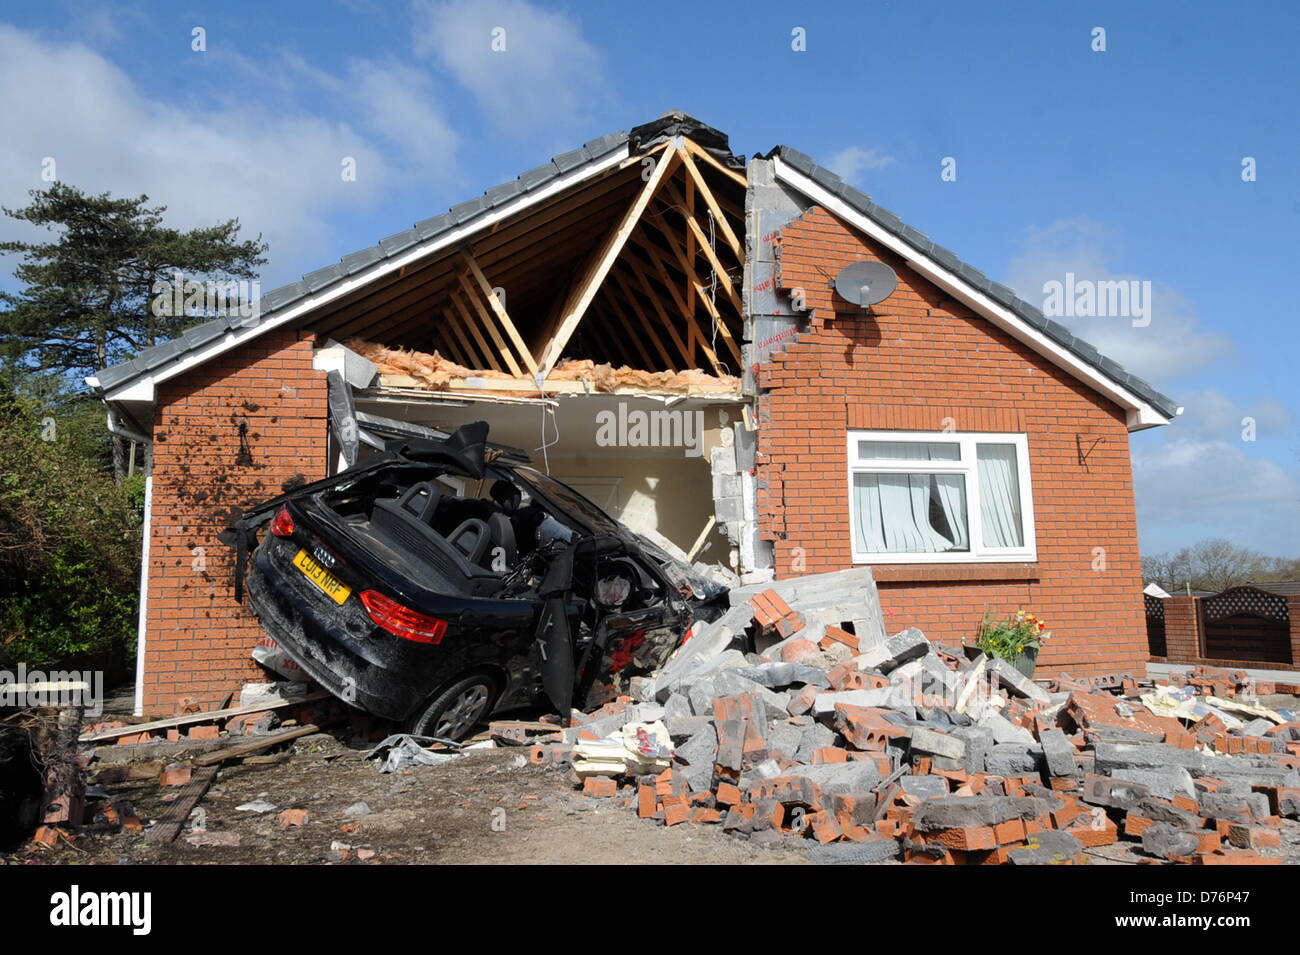 Gowerton, UK. 29th April 2013  The scene of an accident in which a bungalow belonging to Marianne Heath in Gowerton, near Swansea, UK, was partially destroyed by a brand new Audi convertible car that plunged into the lounge whilst she was having breakfast in the kitchen. Credit:  D Legakis / Alamy Live News Stock Photo